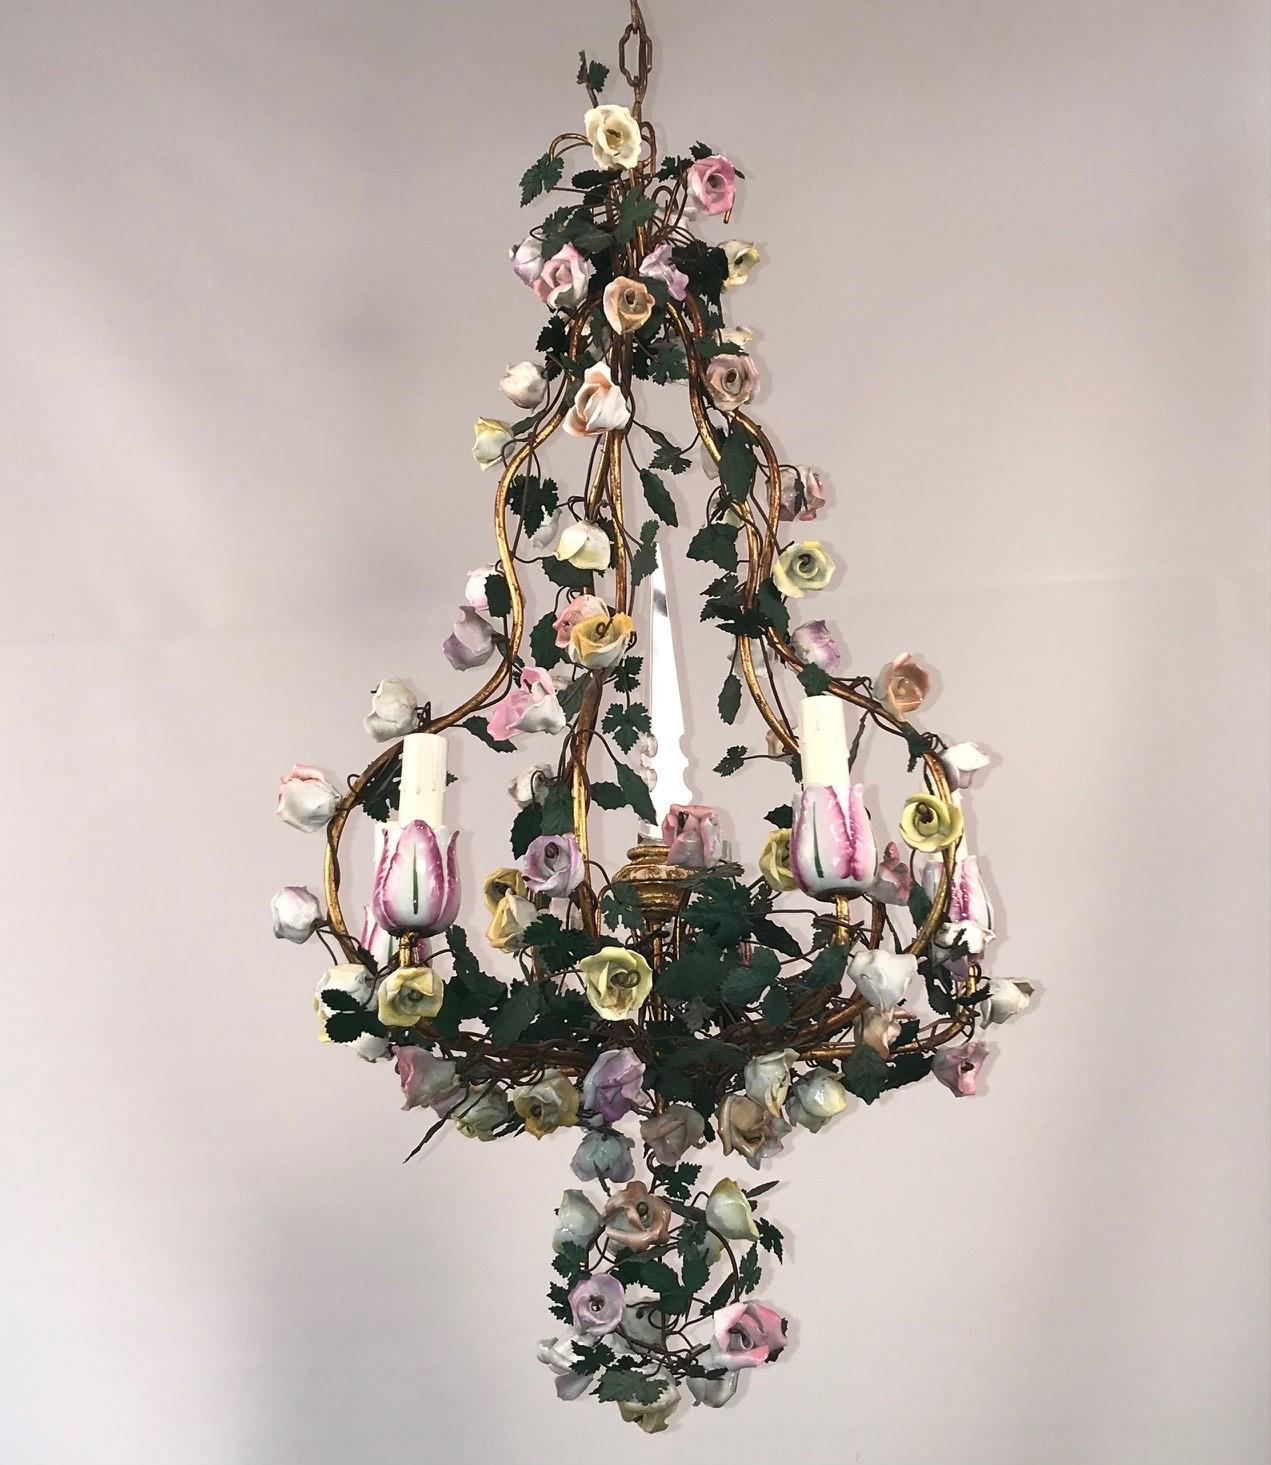 This Romantic chandelier is of a type made by the short-lived Vincennes factory absorbed by Sevres. It has a playful quality with stylized porcelain flowers and painted tole leaves. The candle cups are modelled as tulips.
The chandelier is centered